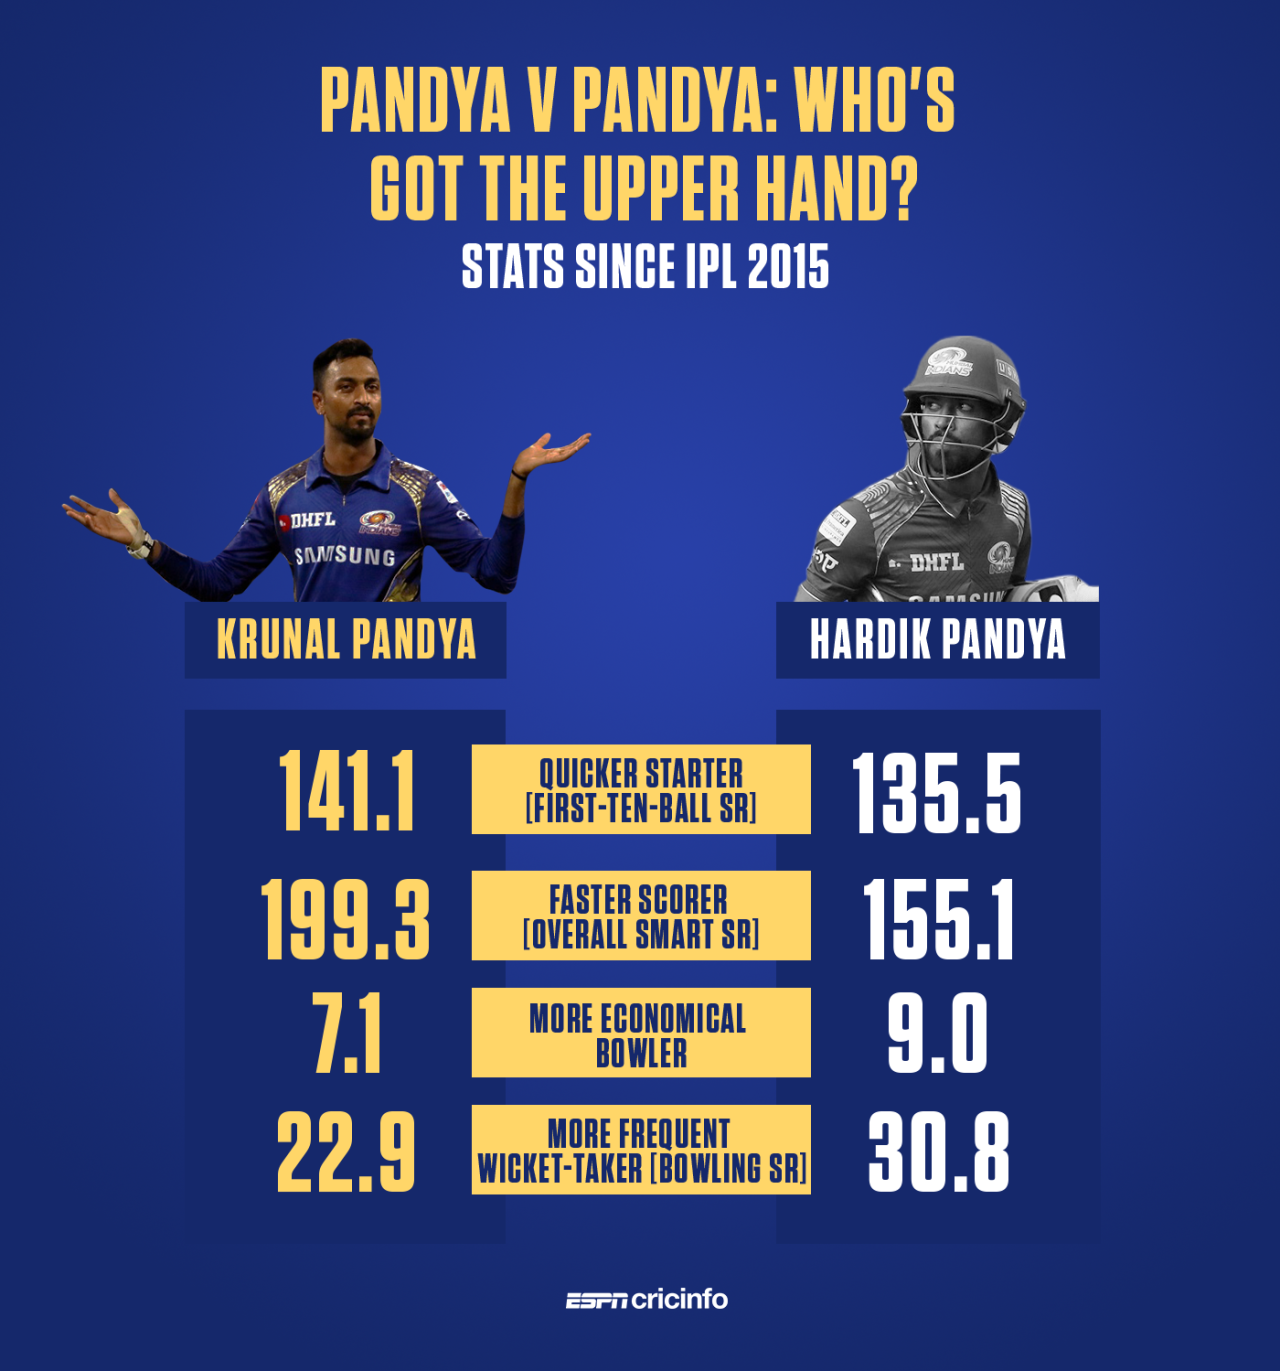 Krunal has an edge over younger brother Hardik across most parameters in the IPL. 
Smart Strike Rate is the SR adjusted to take into account match rate, and the scoring rate at the other end when he batted.